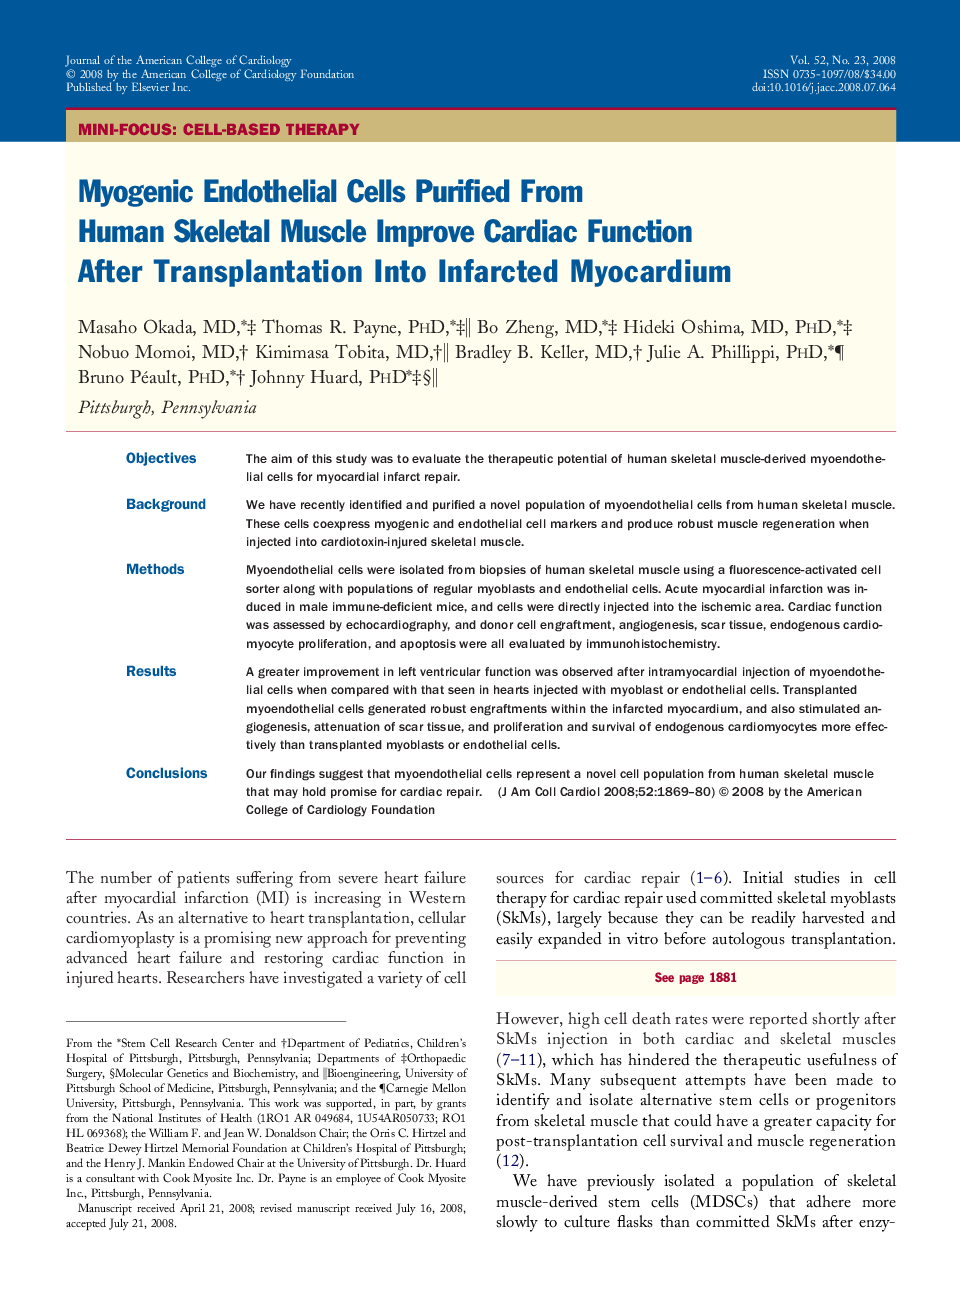 Myogenic Endothelial Cells Purified From Human Skeletal Muscle Improve Cardiac Function After Transplantation Into Infarcted Myocardium 